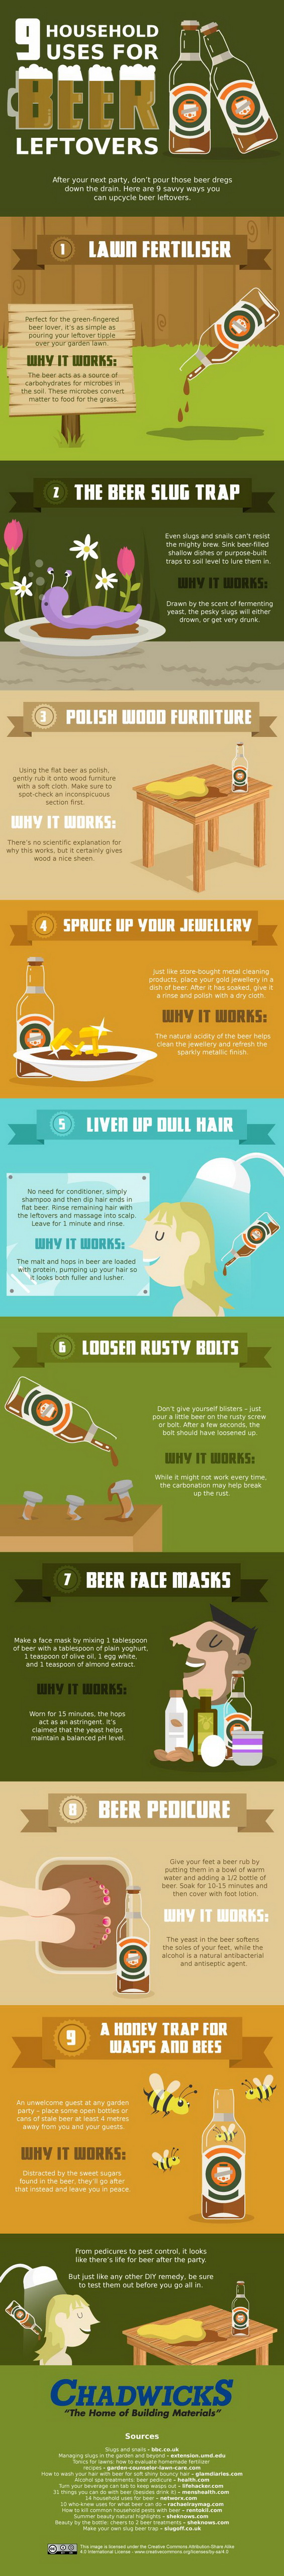 9 Uses for Beer